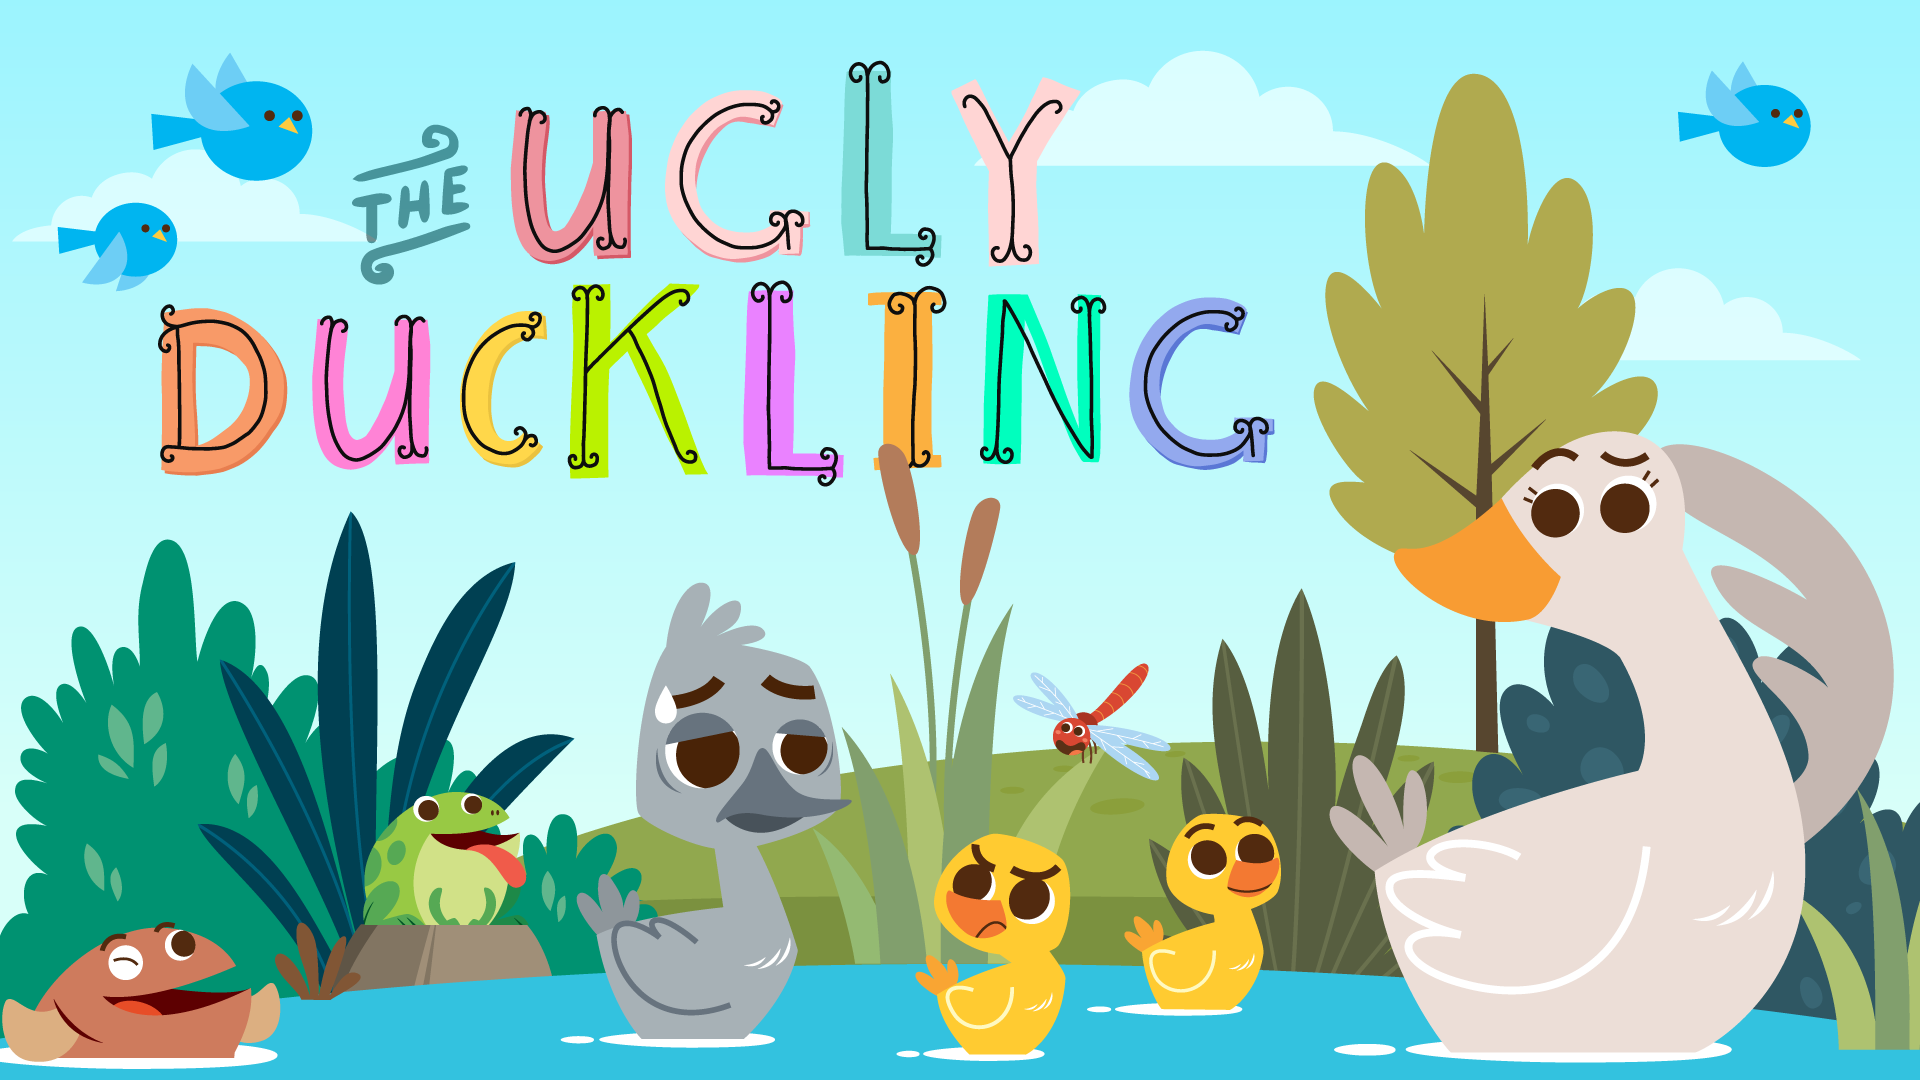 the ugly duckling Porkchop productions